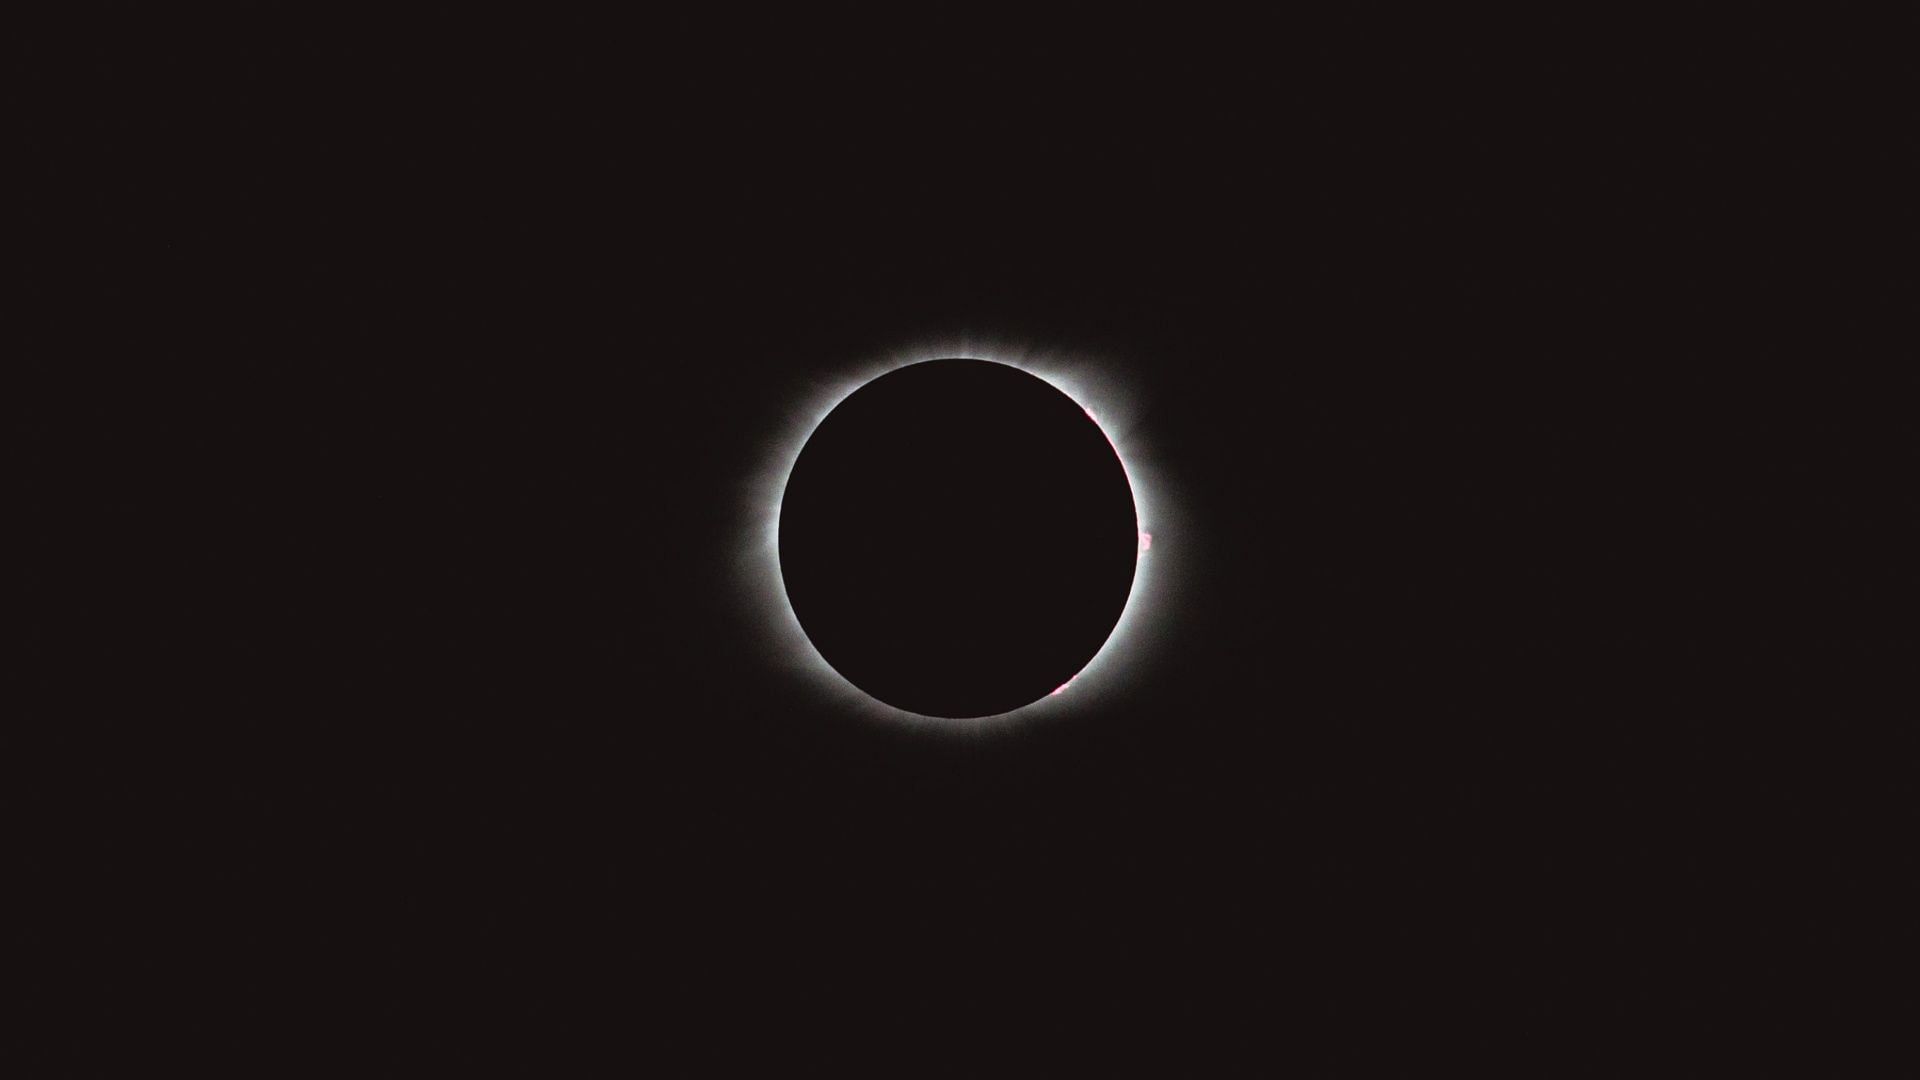 April 8, 2024 will give rise to a total solar eclipse (Photo by Karl Magnuson on Unsplash)